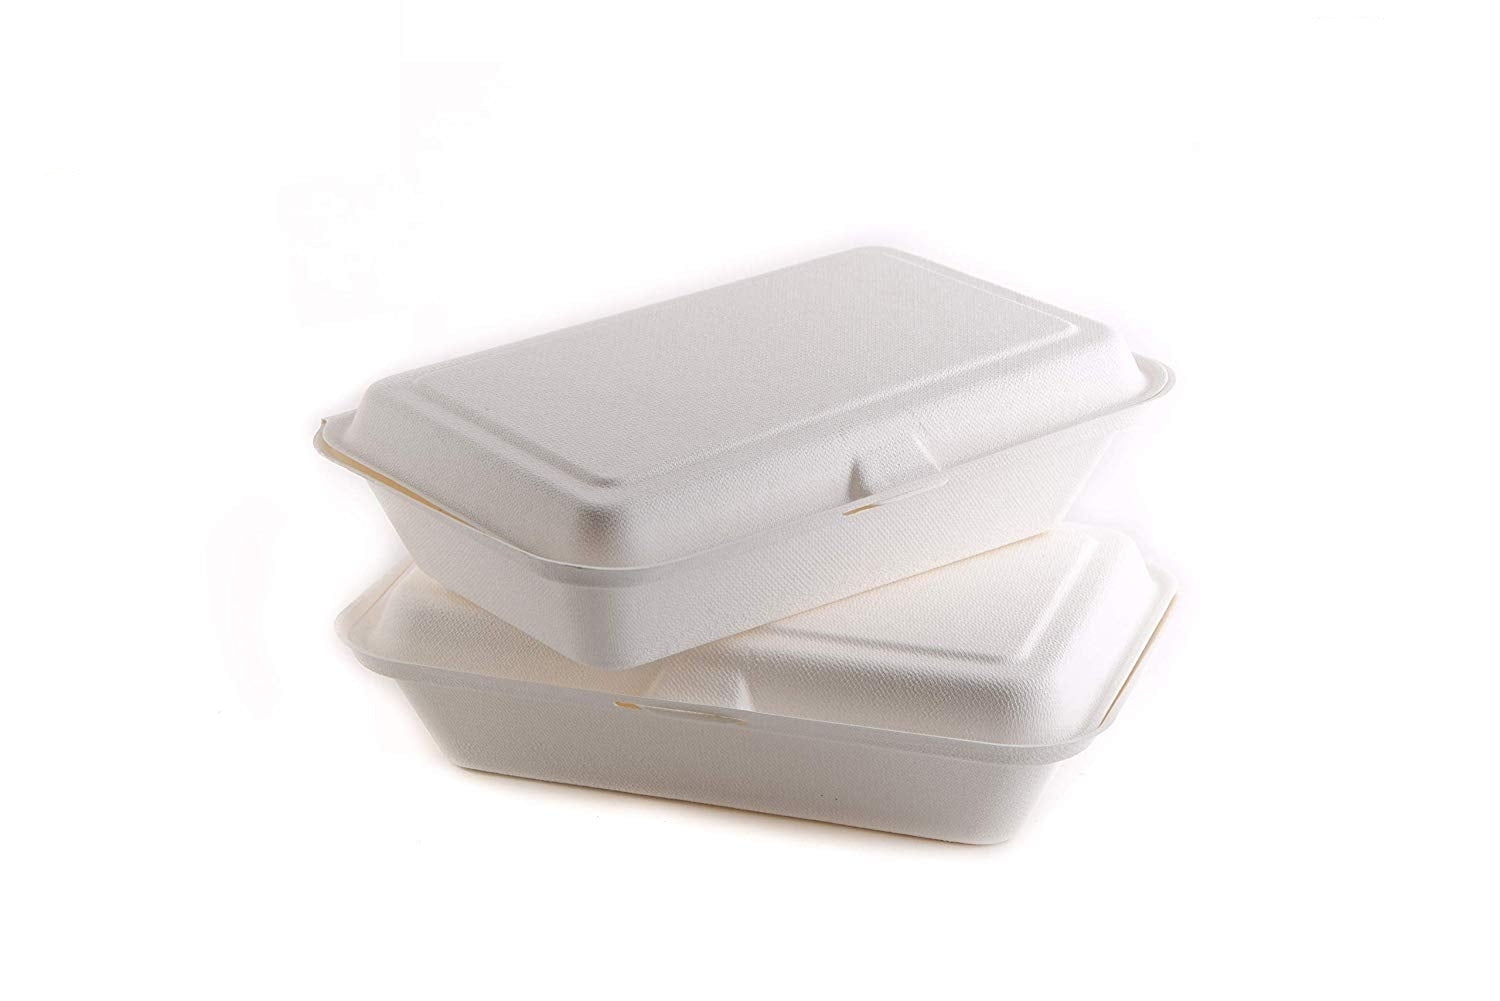 9X9 3-Compartment Clamshell To Go Containers [300pcs/ctn] Renewable &  Compostable Plant-Based